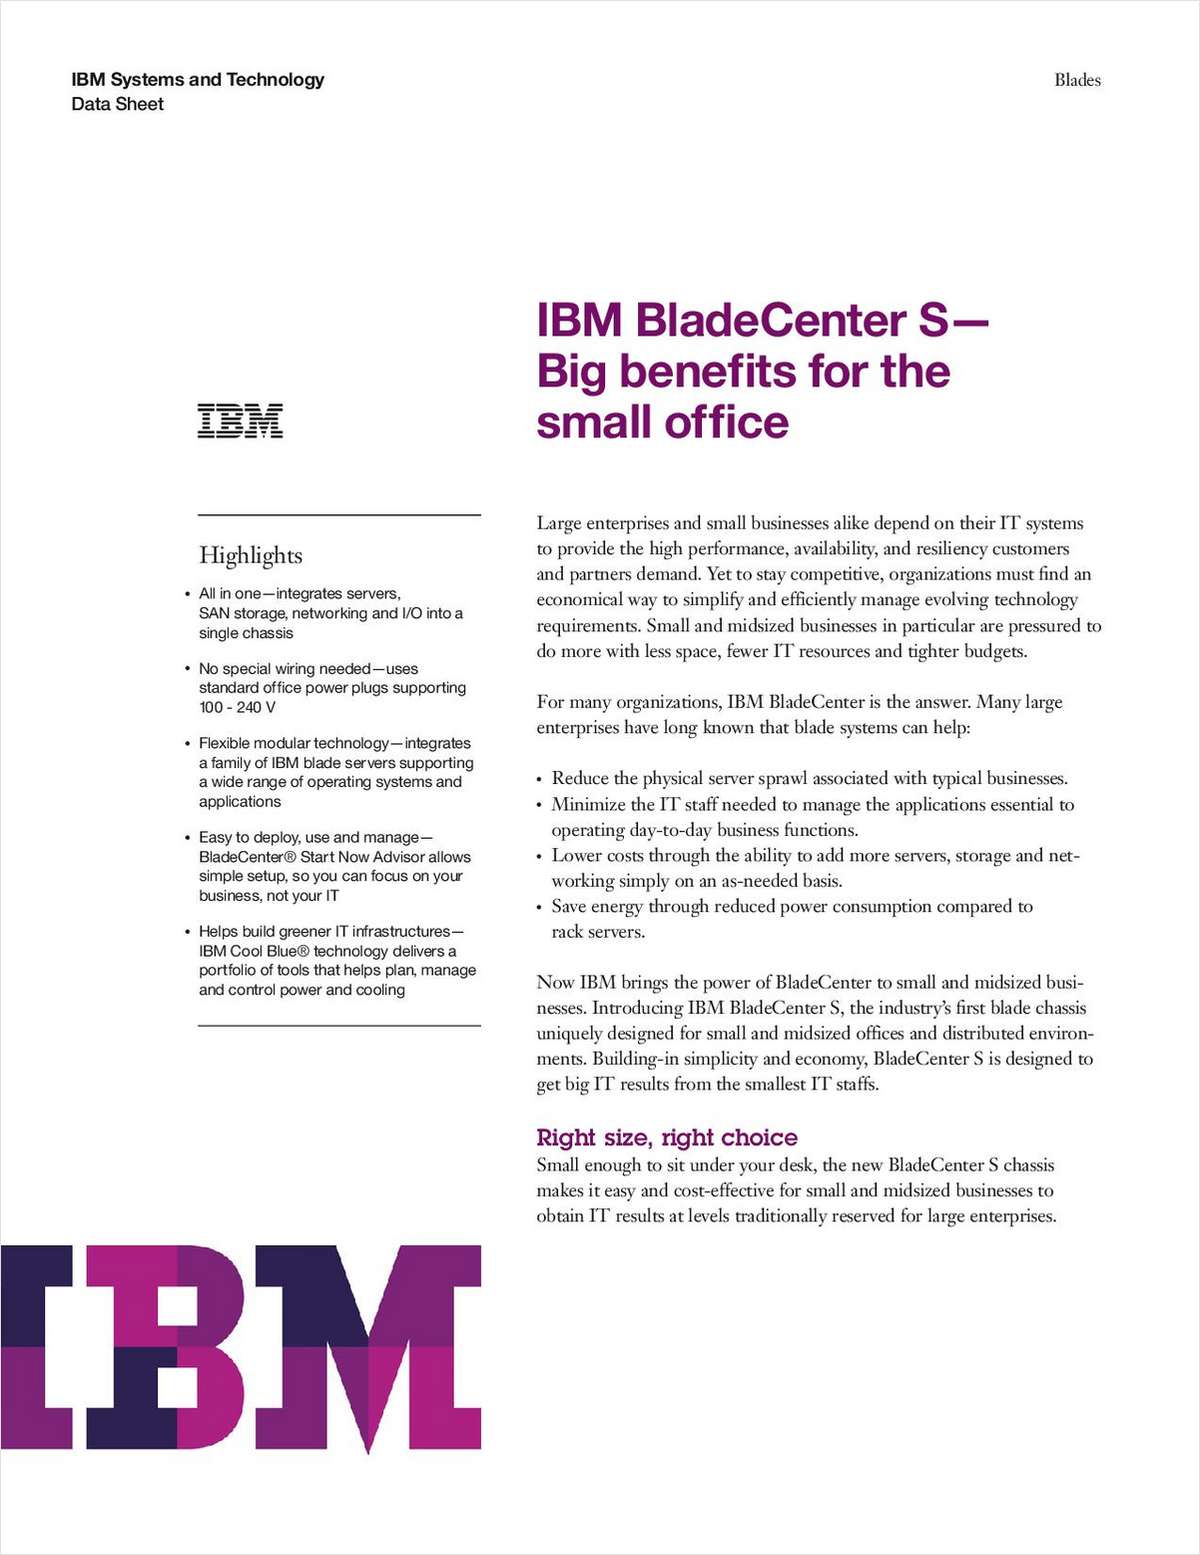 IBM BladeCenter S--Big Benefits for the Small Office